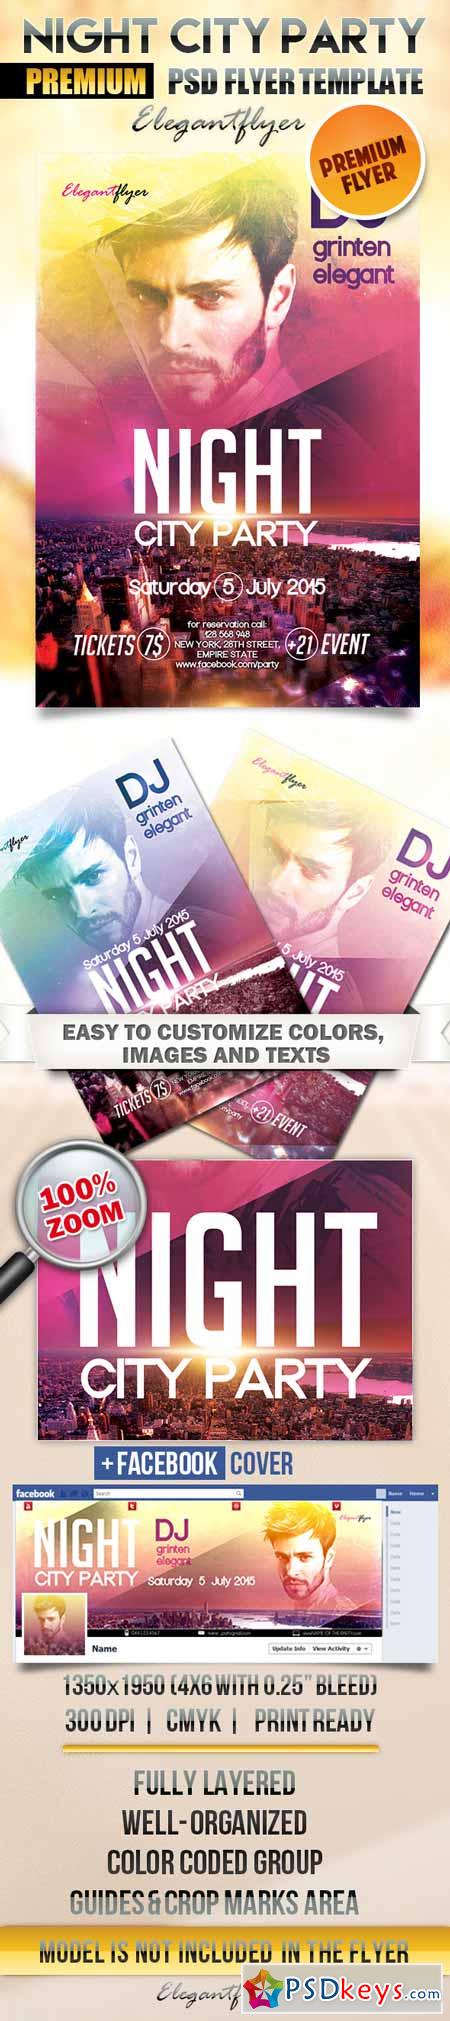 Night City party  Flyer PSD Template + Facebook Cover